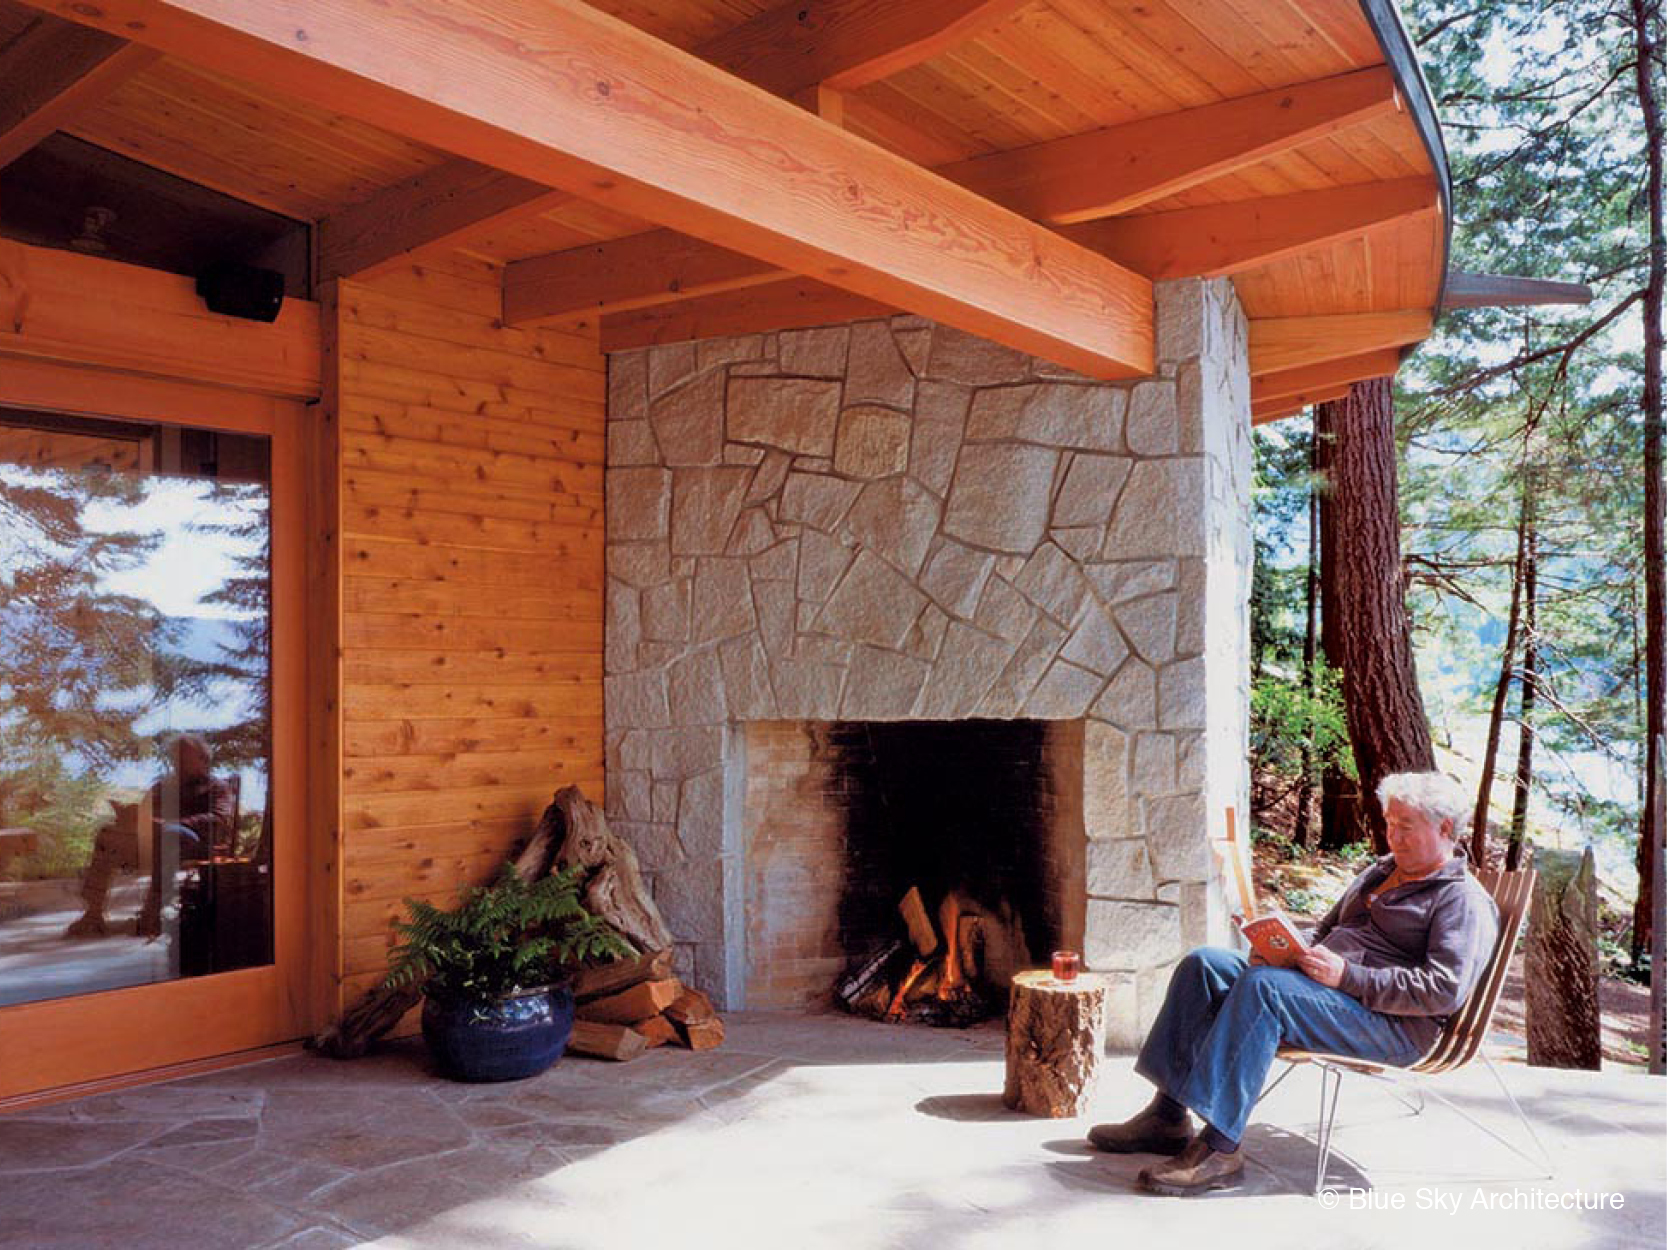 Outdoor fireplace of the Deer Path House